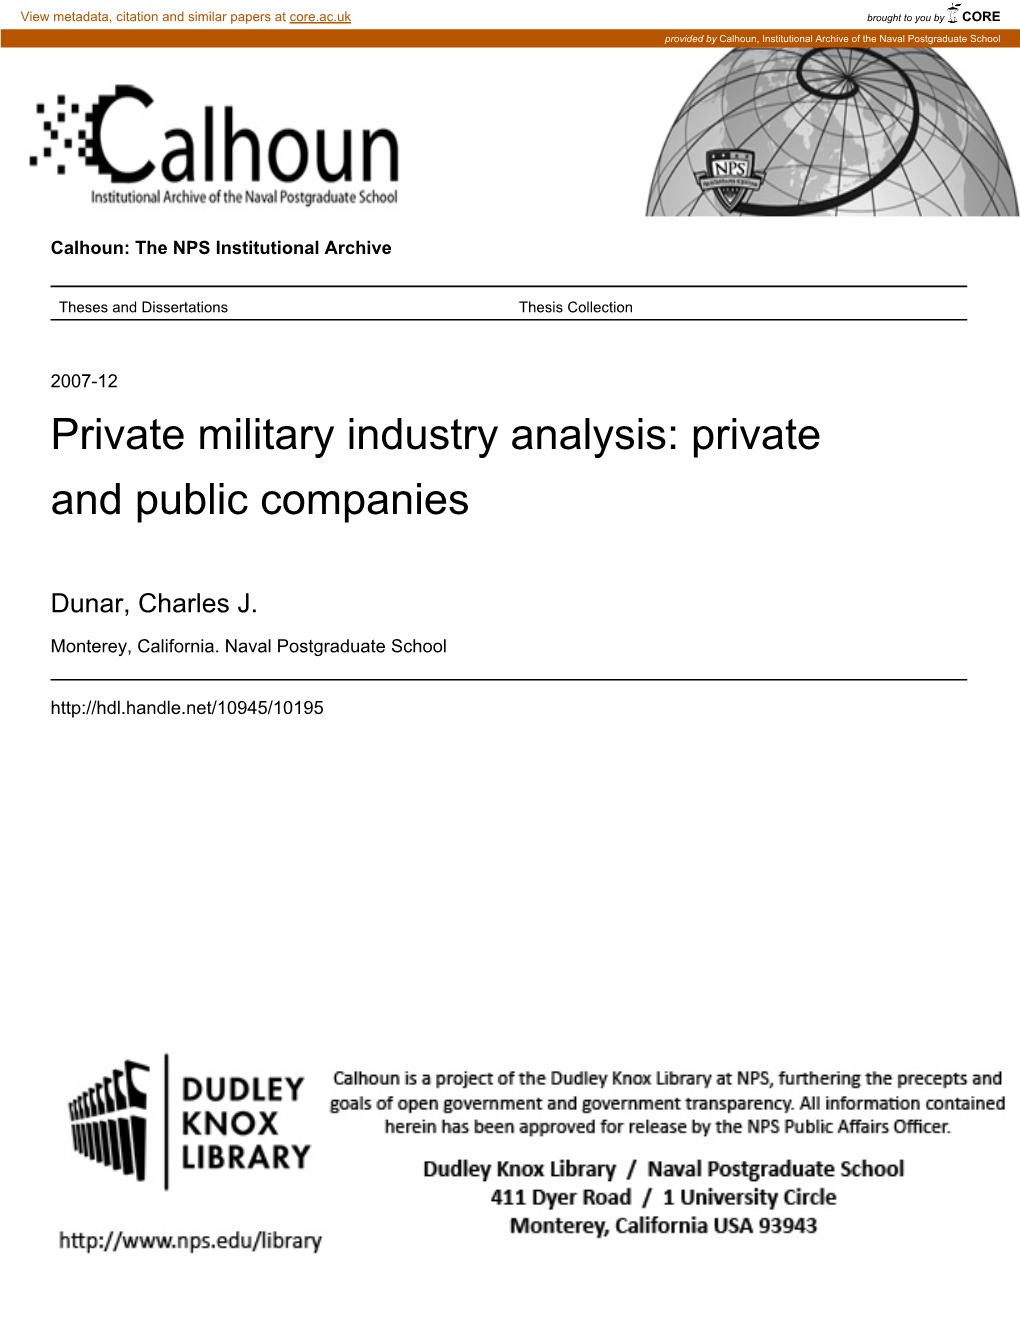 Private Military Industry Analysis: Private and Public Companies